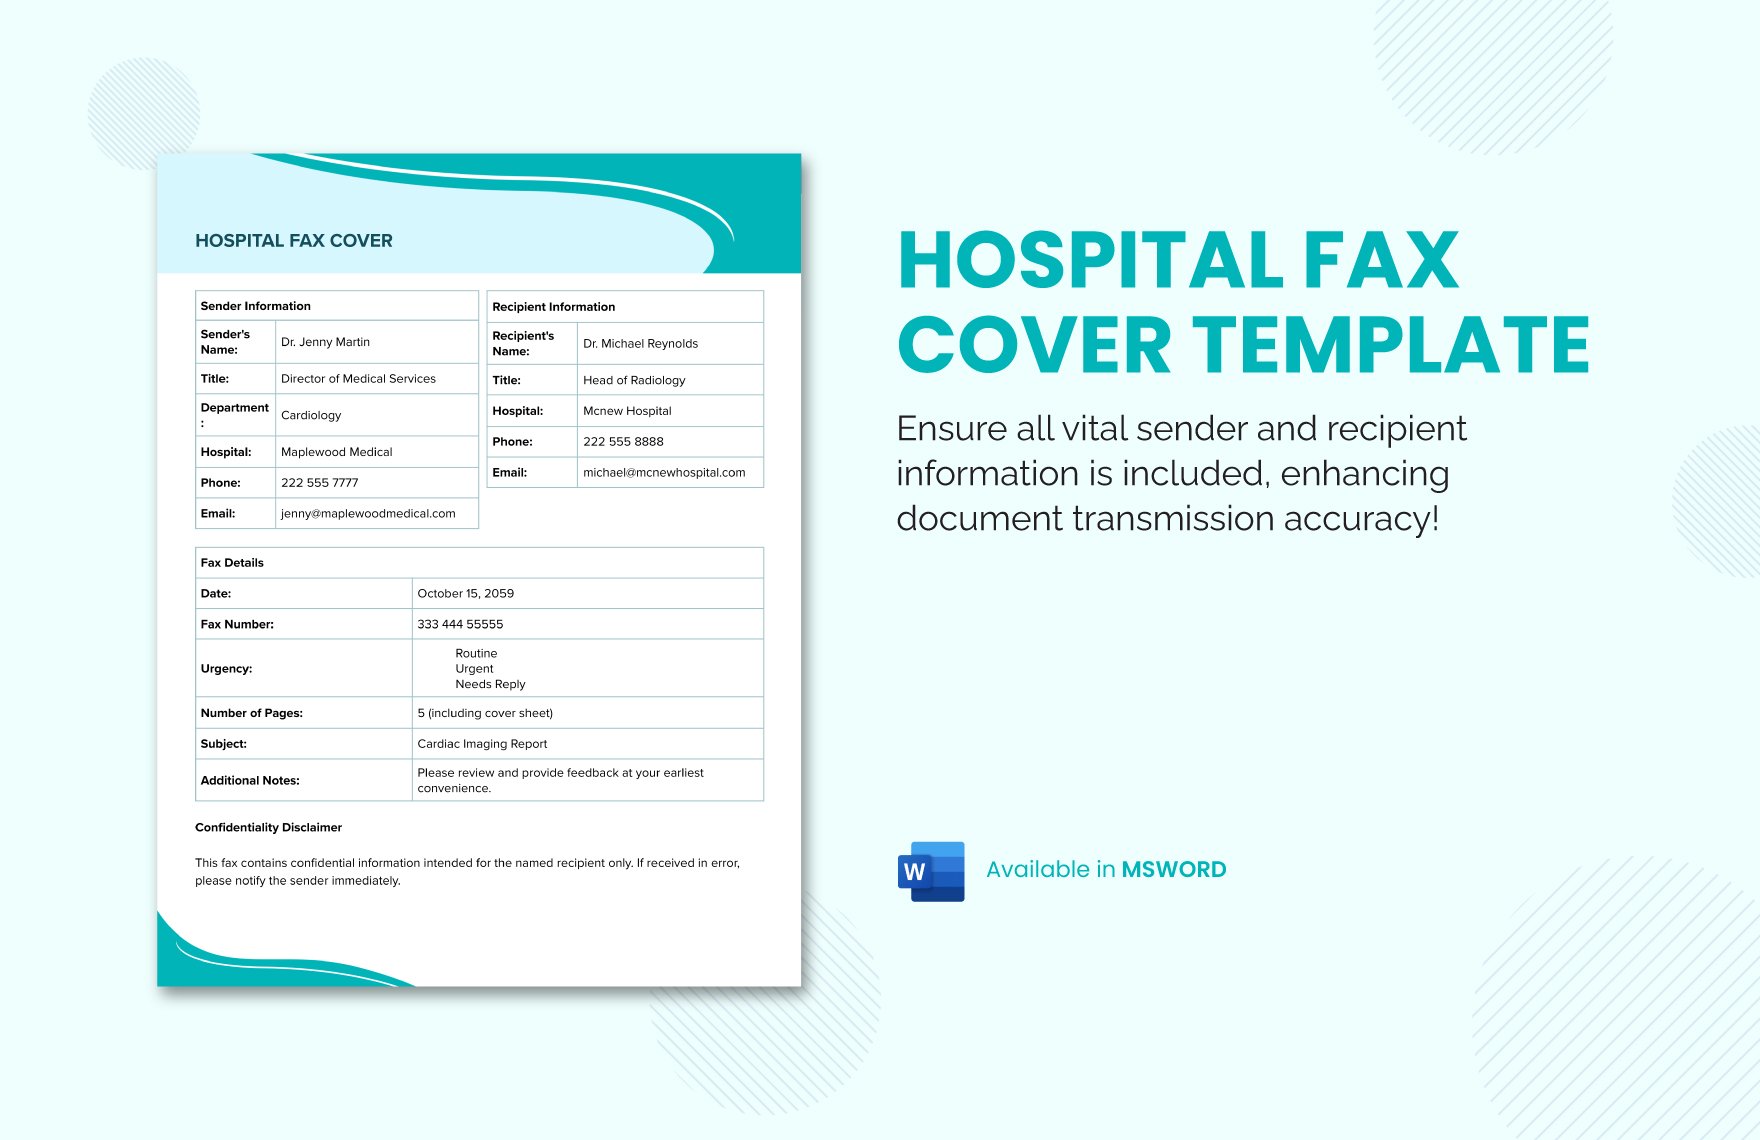 Hospital Fax Cover Template in Word